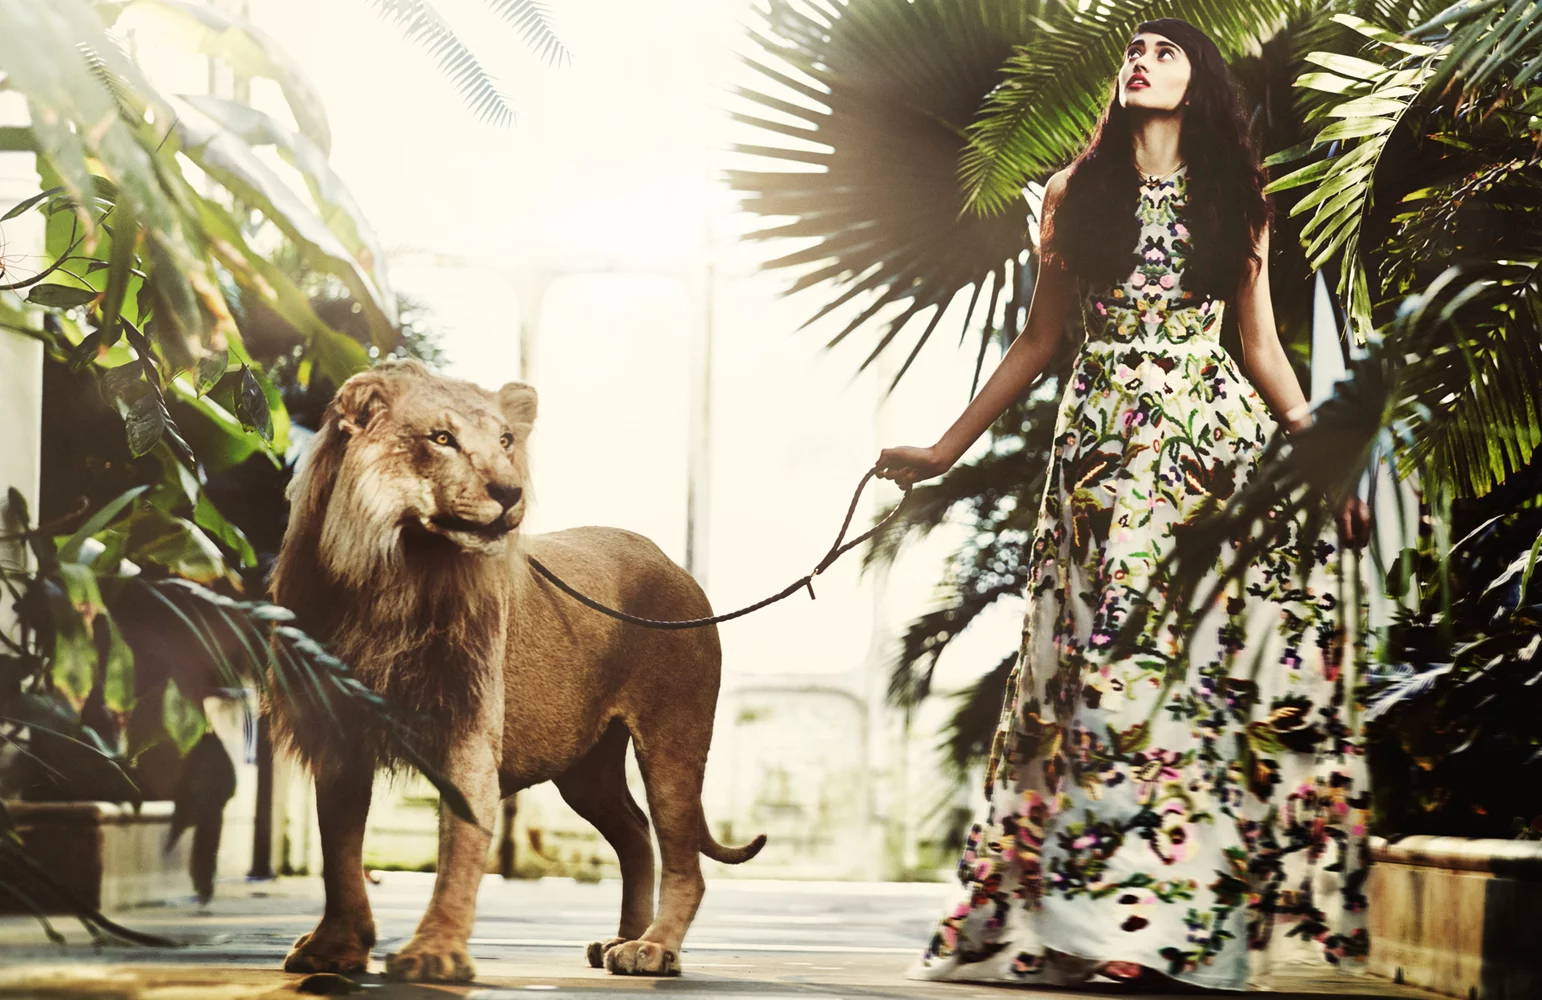 Vogue India 7 by Esther HAASE